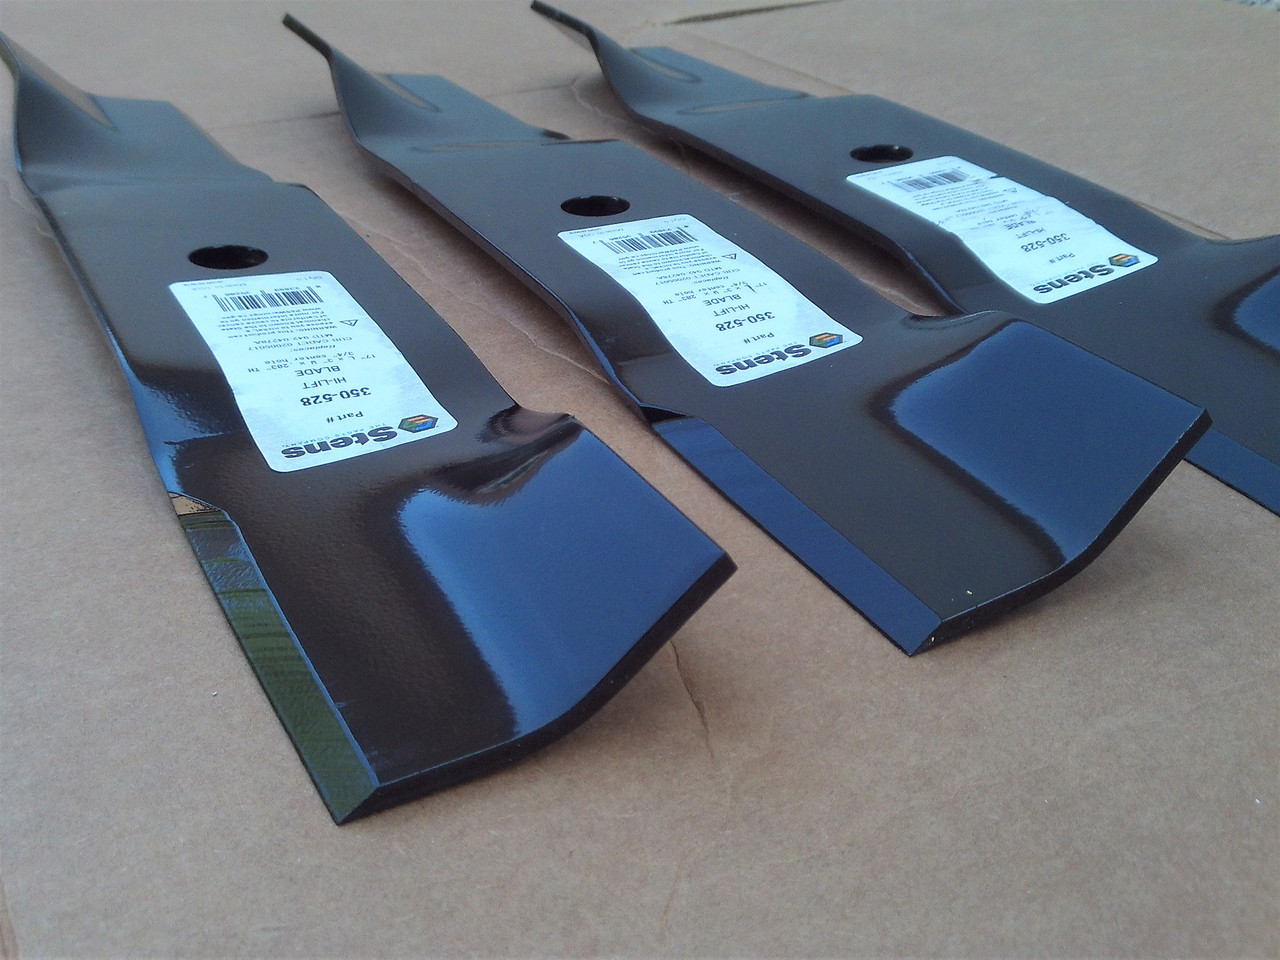 Blades for Cub Cadet Enforcer, Recon, Tank, Z Force 48" Cut 01005336, 01005336P, 02005017, 742-04417, 942-04417 Made In USA, Hi Lift Blade Set of 3